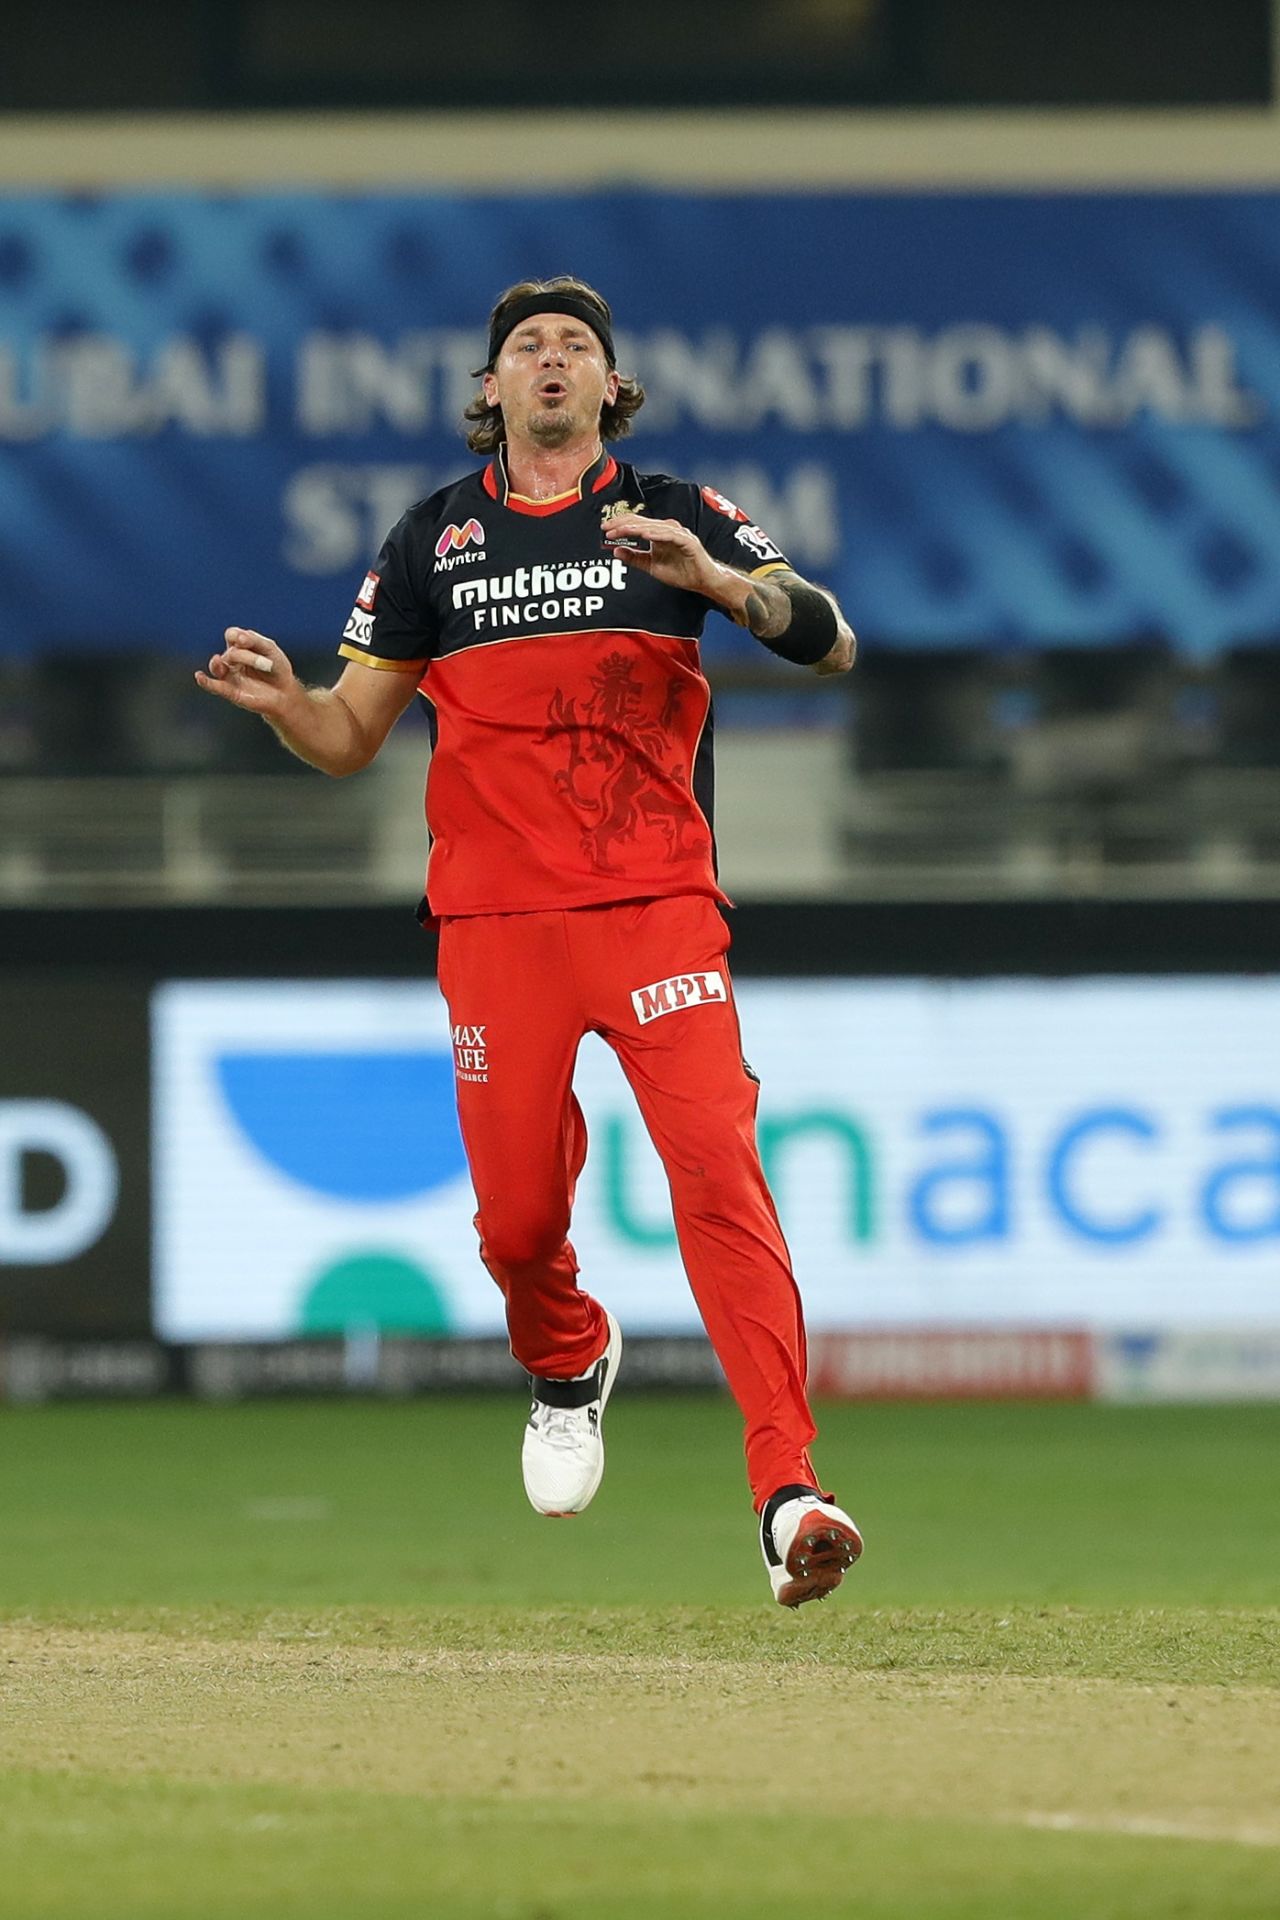 Dale Steyn didn't find much success in his opening spell, Royal Challengers Bangalore vs Sunrisers Hyderabad, IPL 2020, Dubai, September 21, 2020